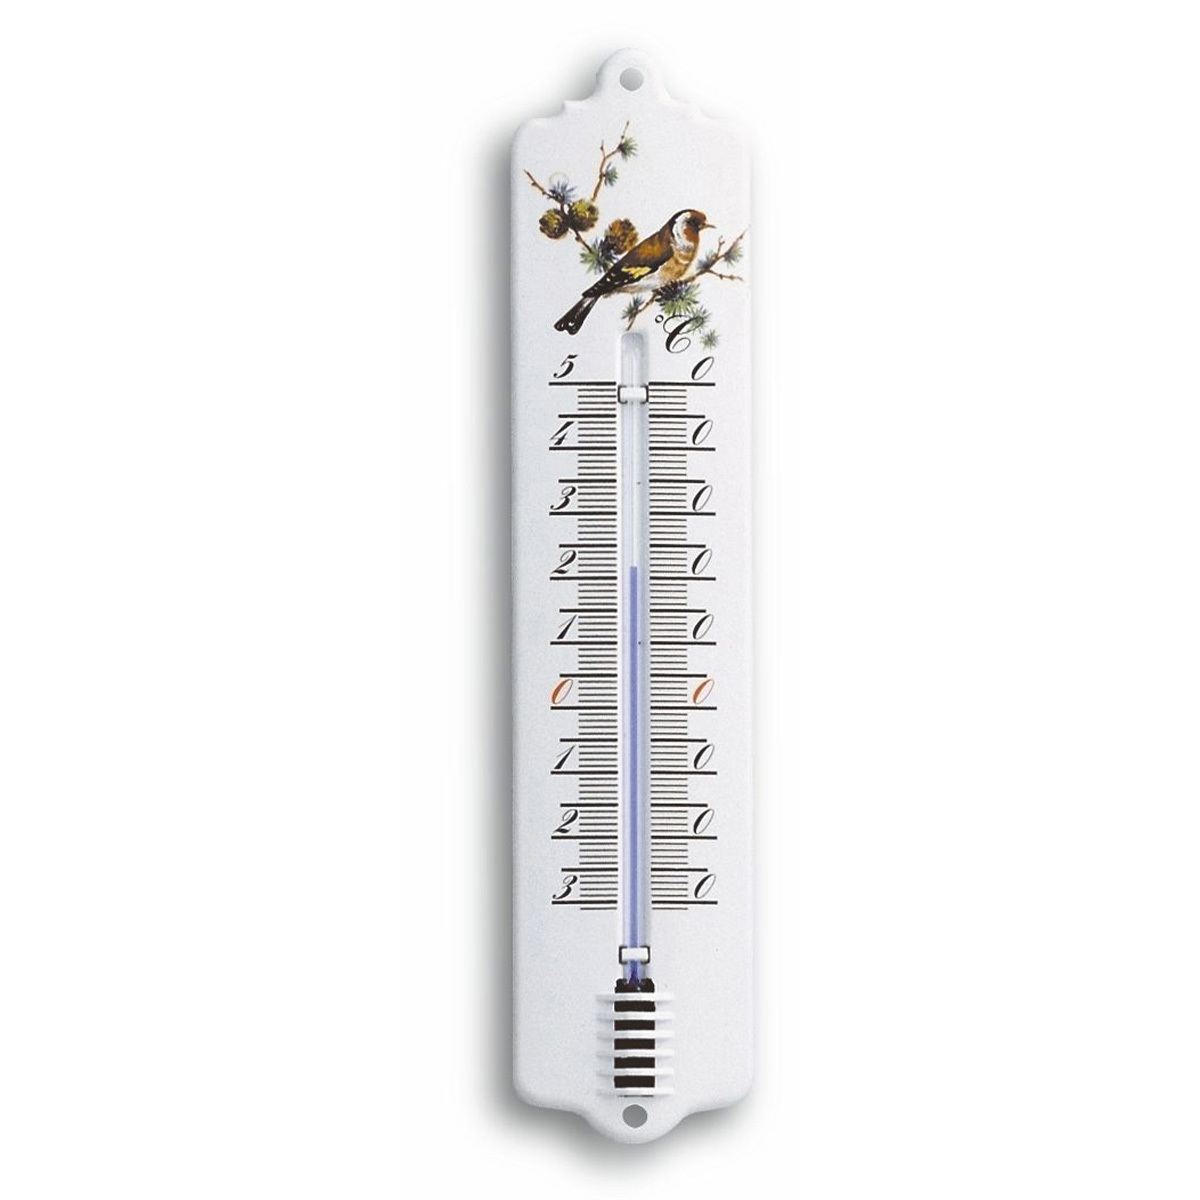 Analogue indoor-outdoor thermometer made of metal